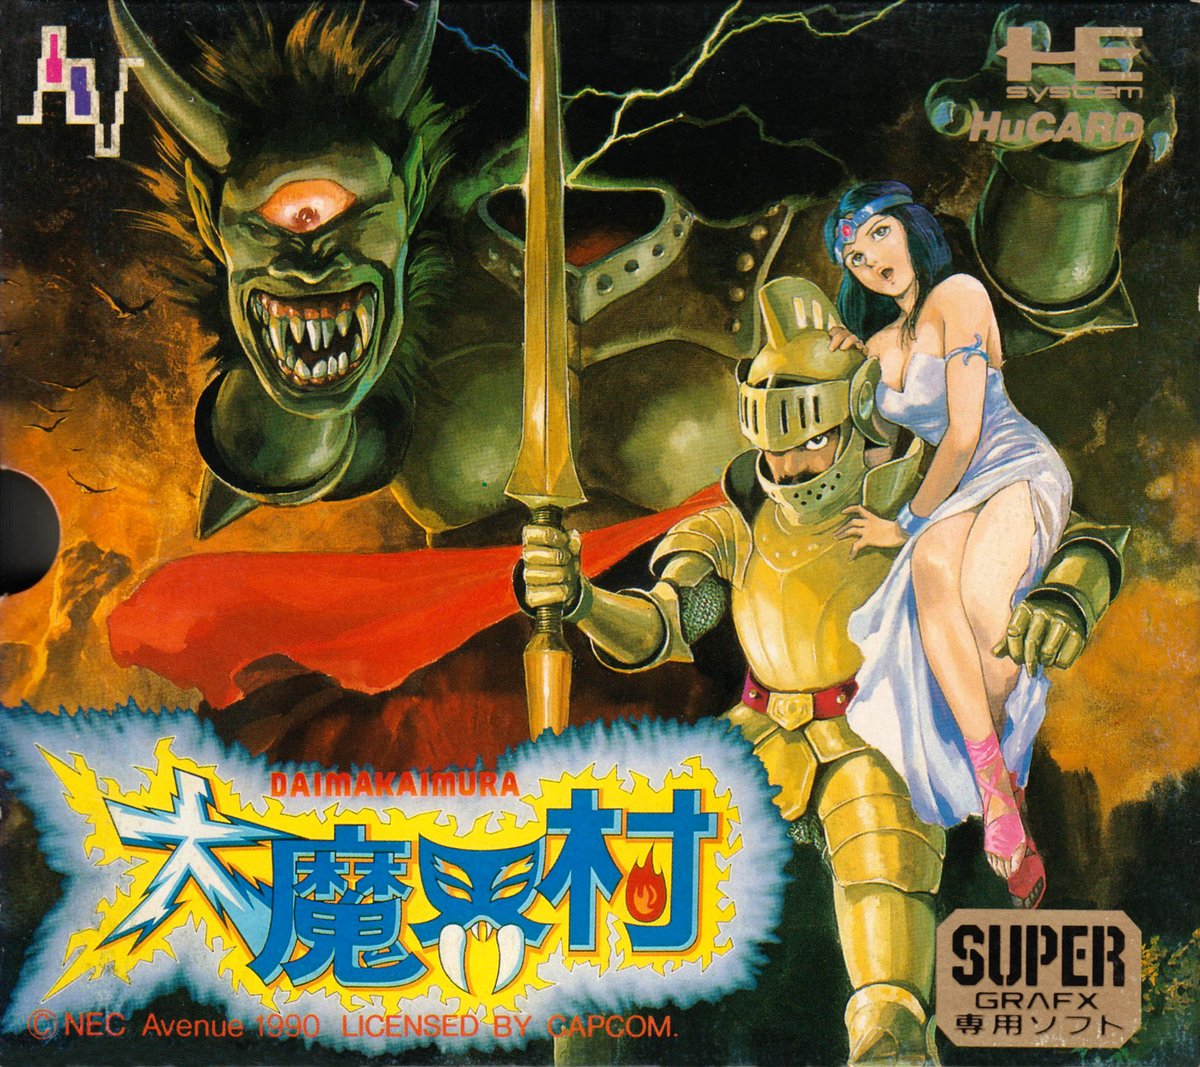 Regarding the Super Grafx version, the developers couldn't find an illustrator at first so one of them called his friend Nozomu Tamaki / 環望 (who had started a mangaka career recently). The team wasn't satisfied with his cover art sketch and asked Yoshikazu Yasuhiko to make it.